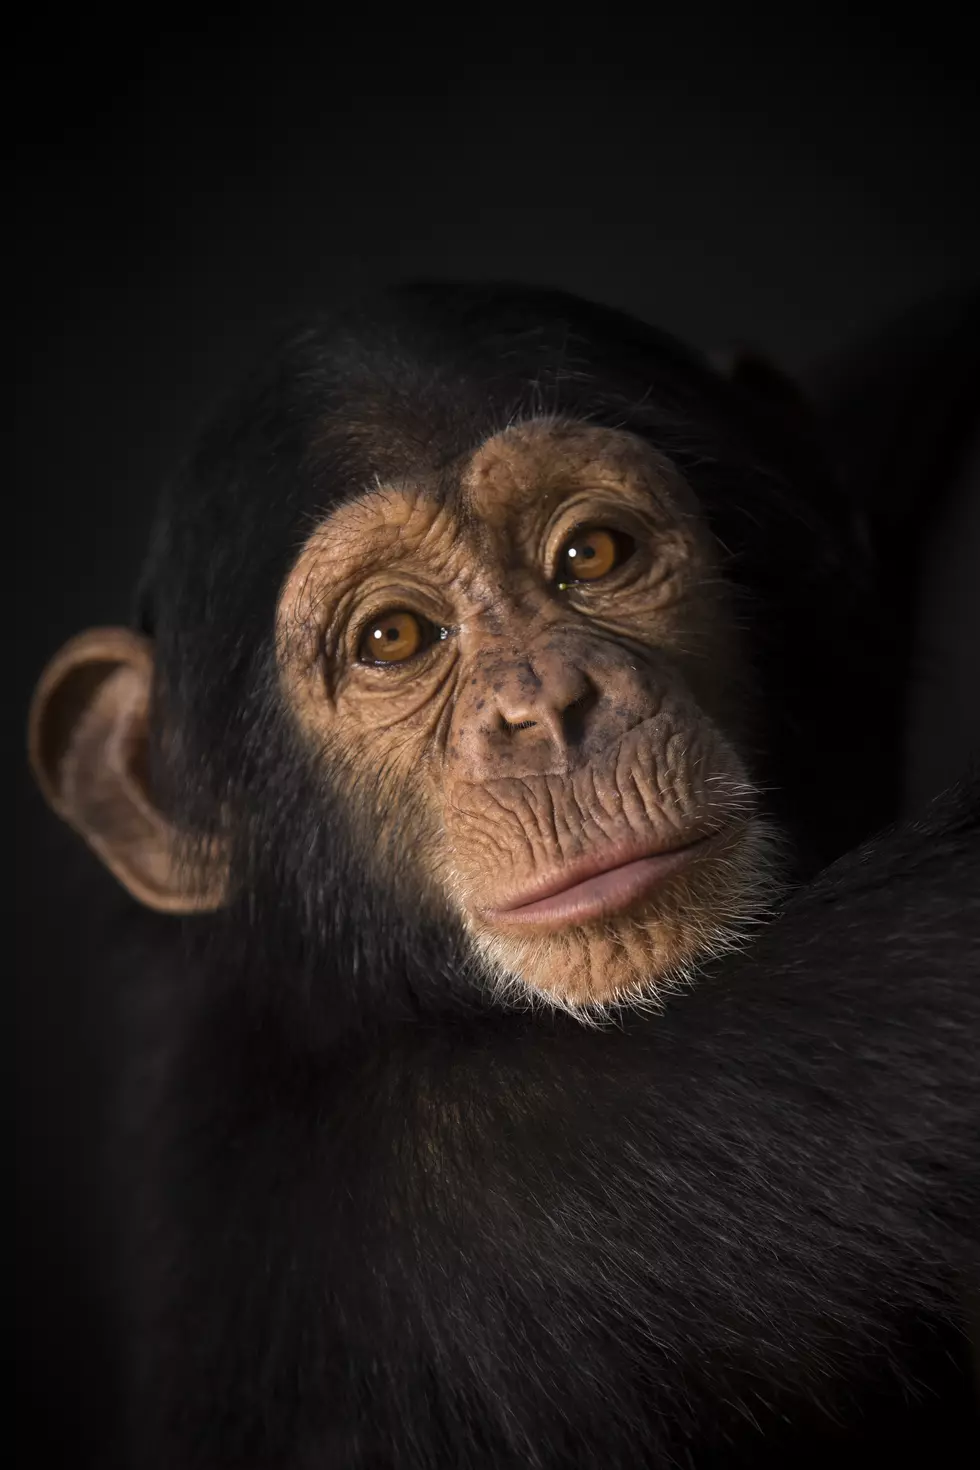 Chimpanzee Discovery Day at Chimp Haven is This Saturday!